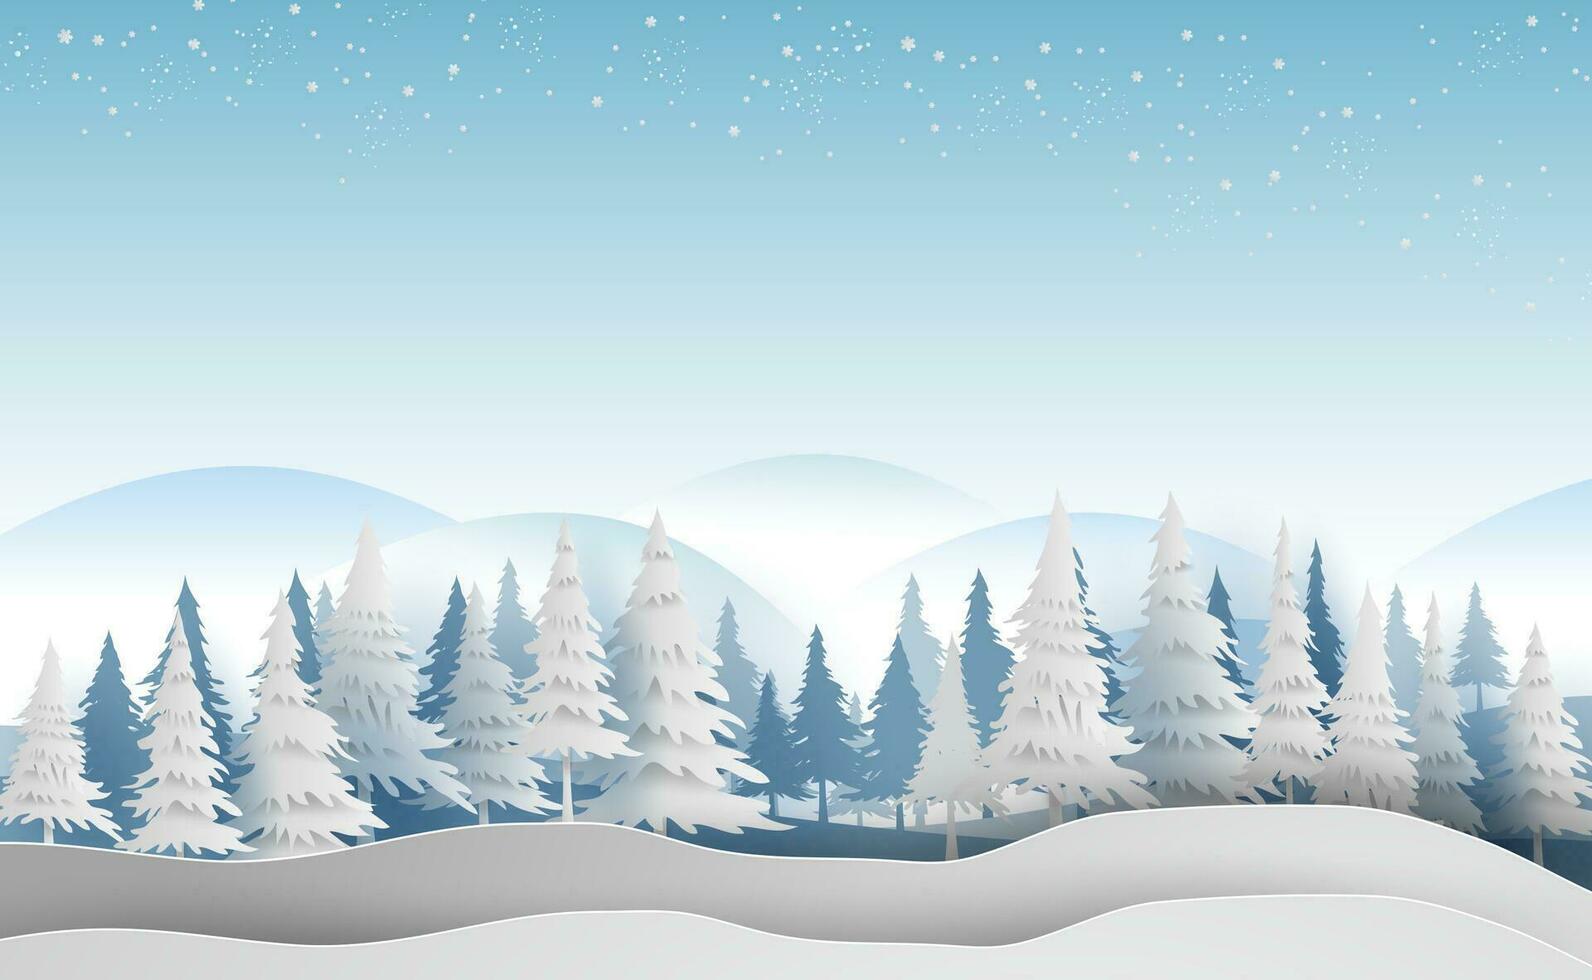 Scenery Merry Christmas and New Year on holidays landscape with forest winter snowflakes season landscape.Creative design paper art and cut style for card and Xmas postcard Vector Illustration.EPS10